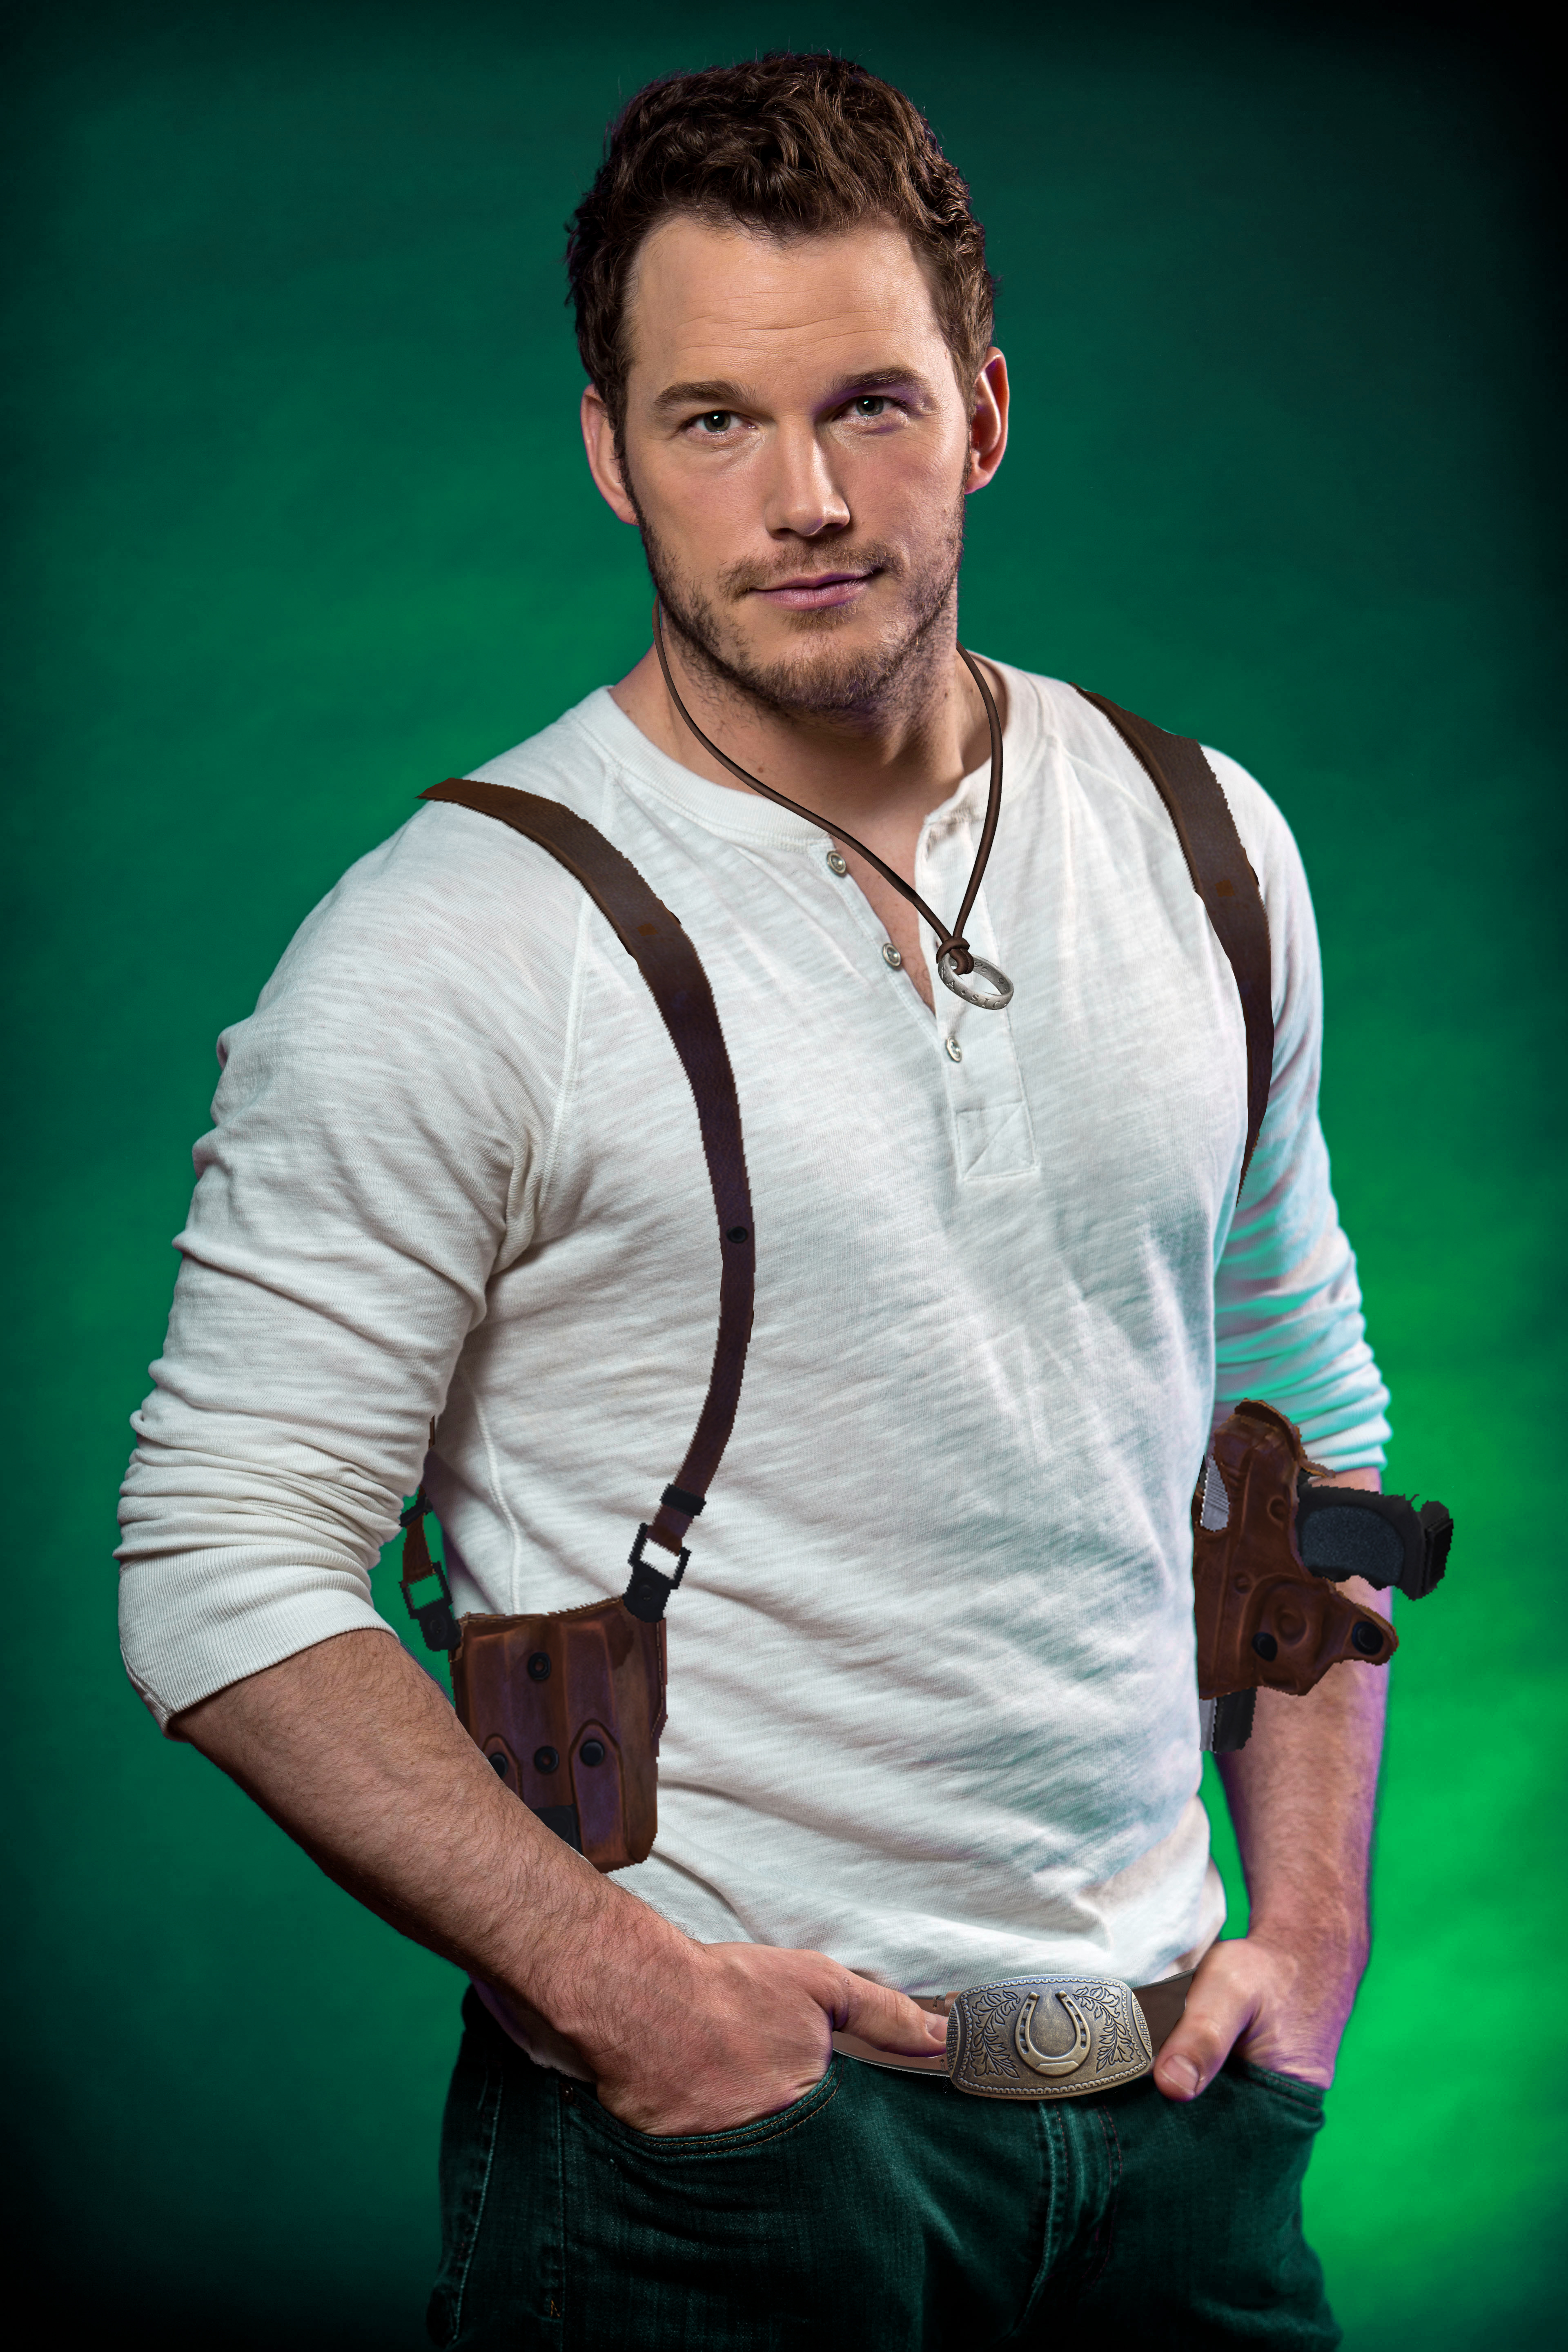 uncharted_fan_cast__chris_pratt_as_nathan_drake_by_imwithstoopid13-d7m49yr.jpg